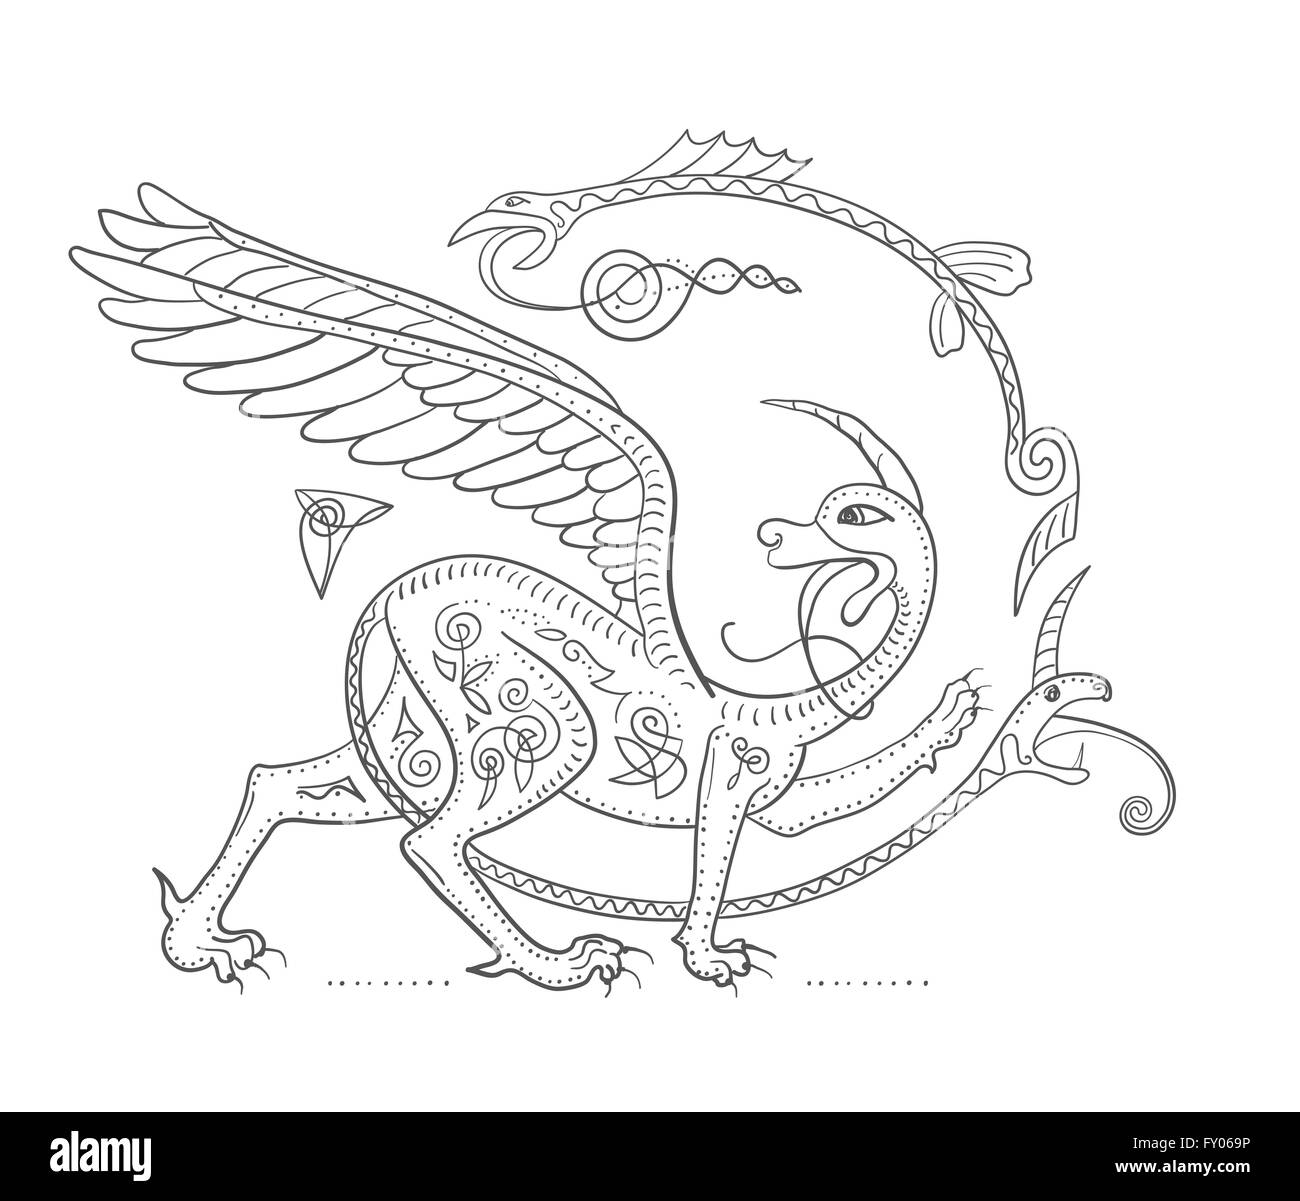 Griffin fantasy monster creature. Medieval style illustration circle decorative composition Stock Photo